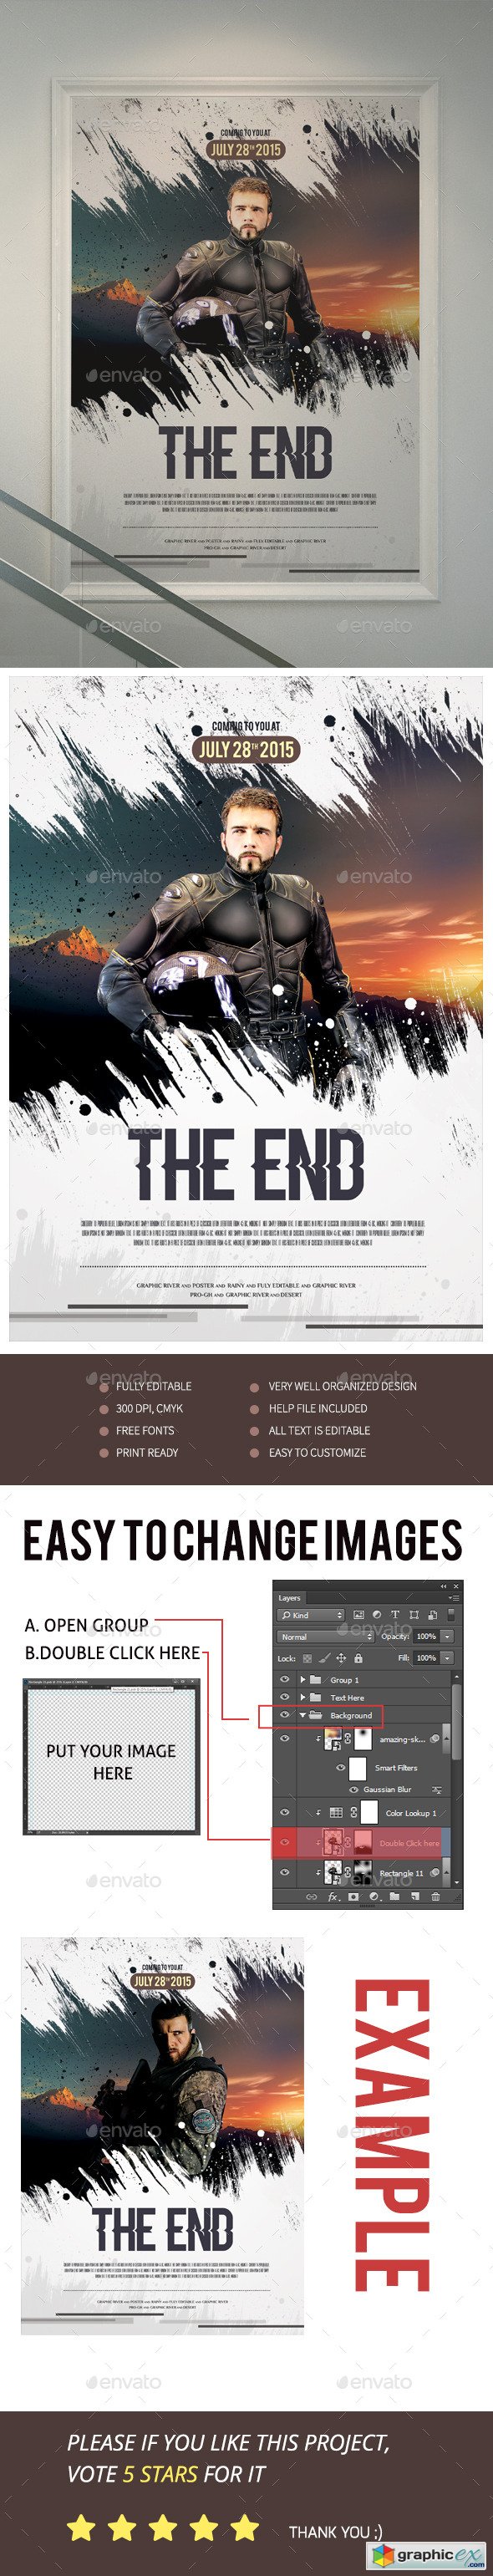 The End Movie Poster/Flyer III